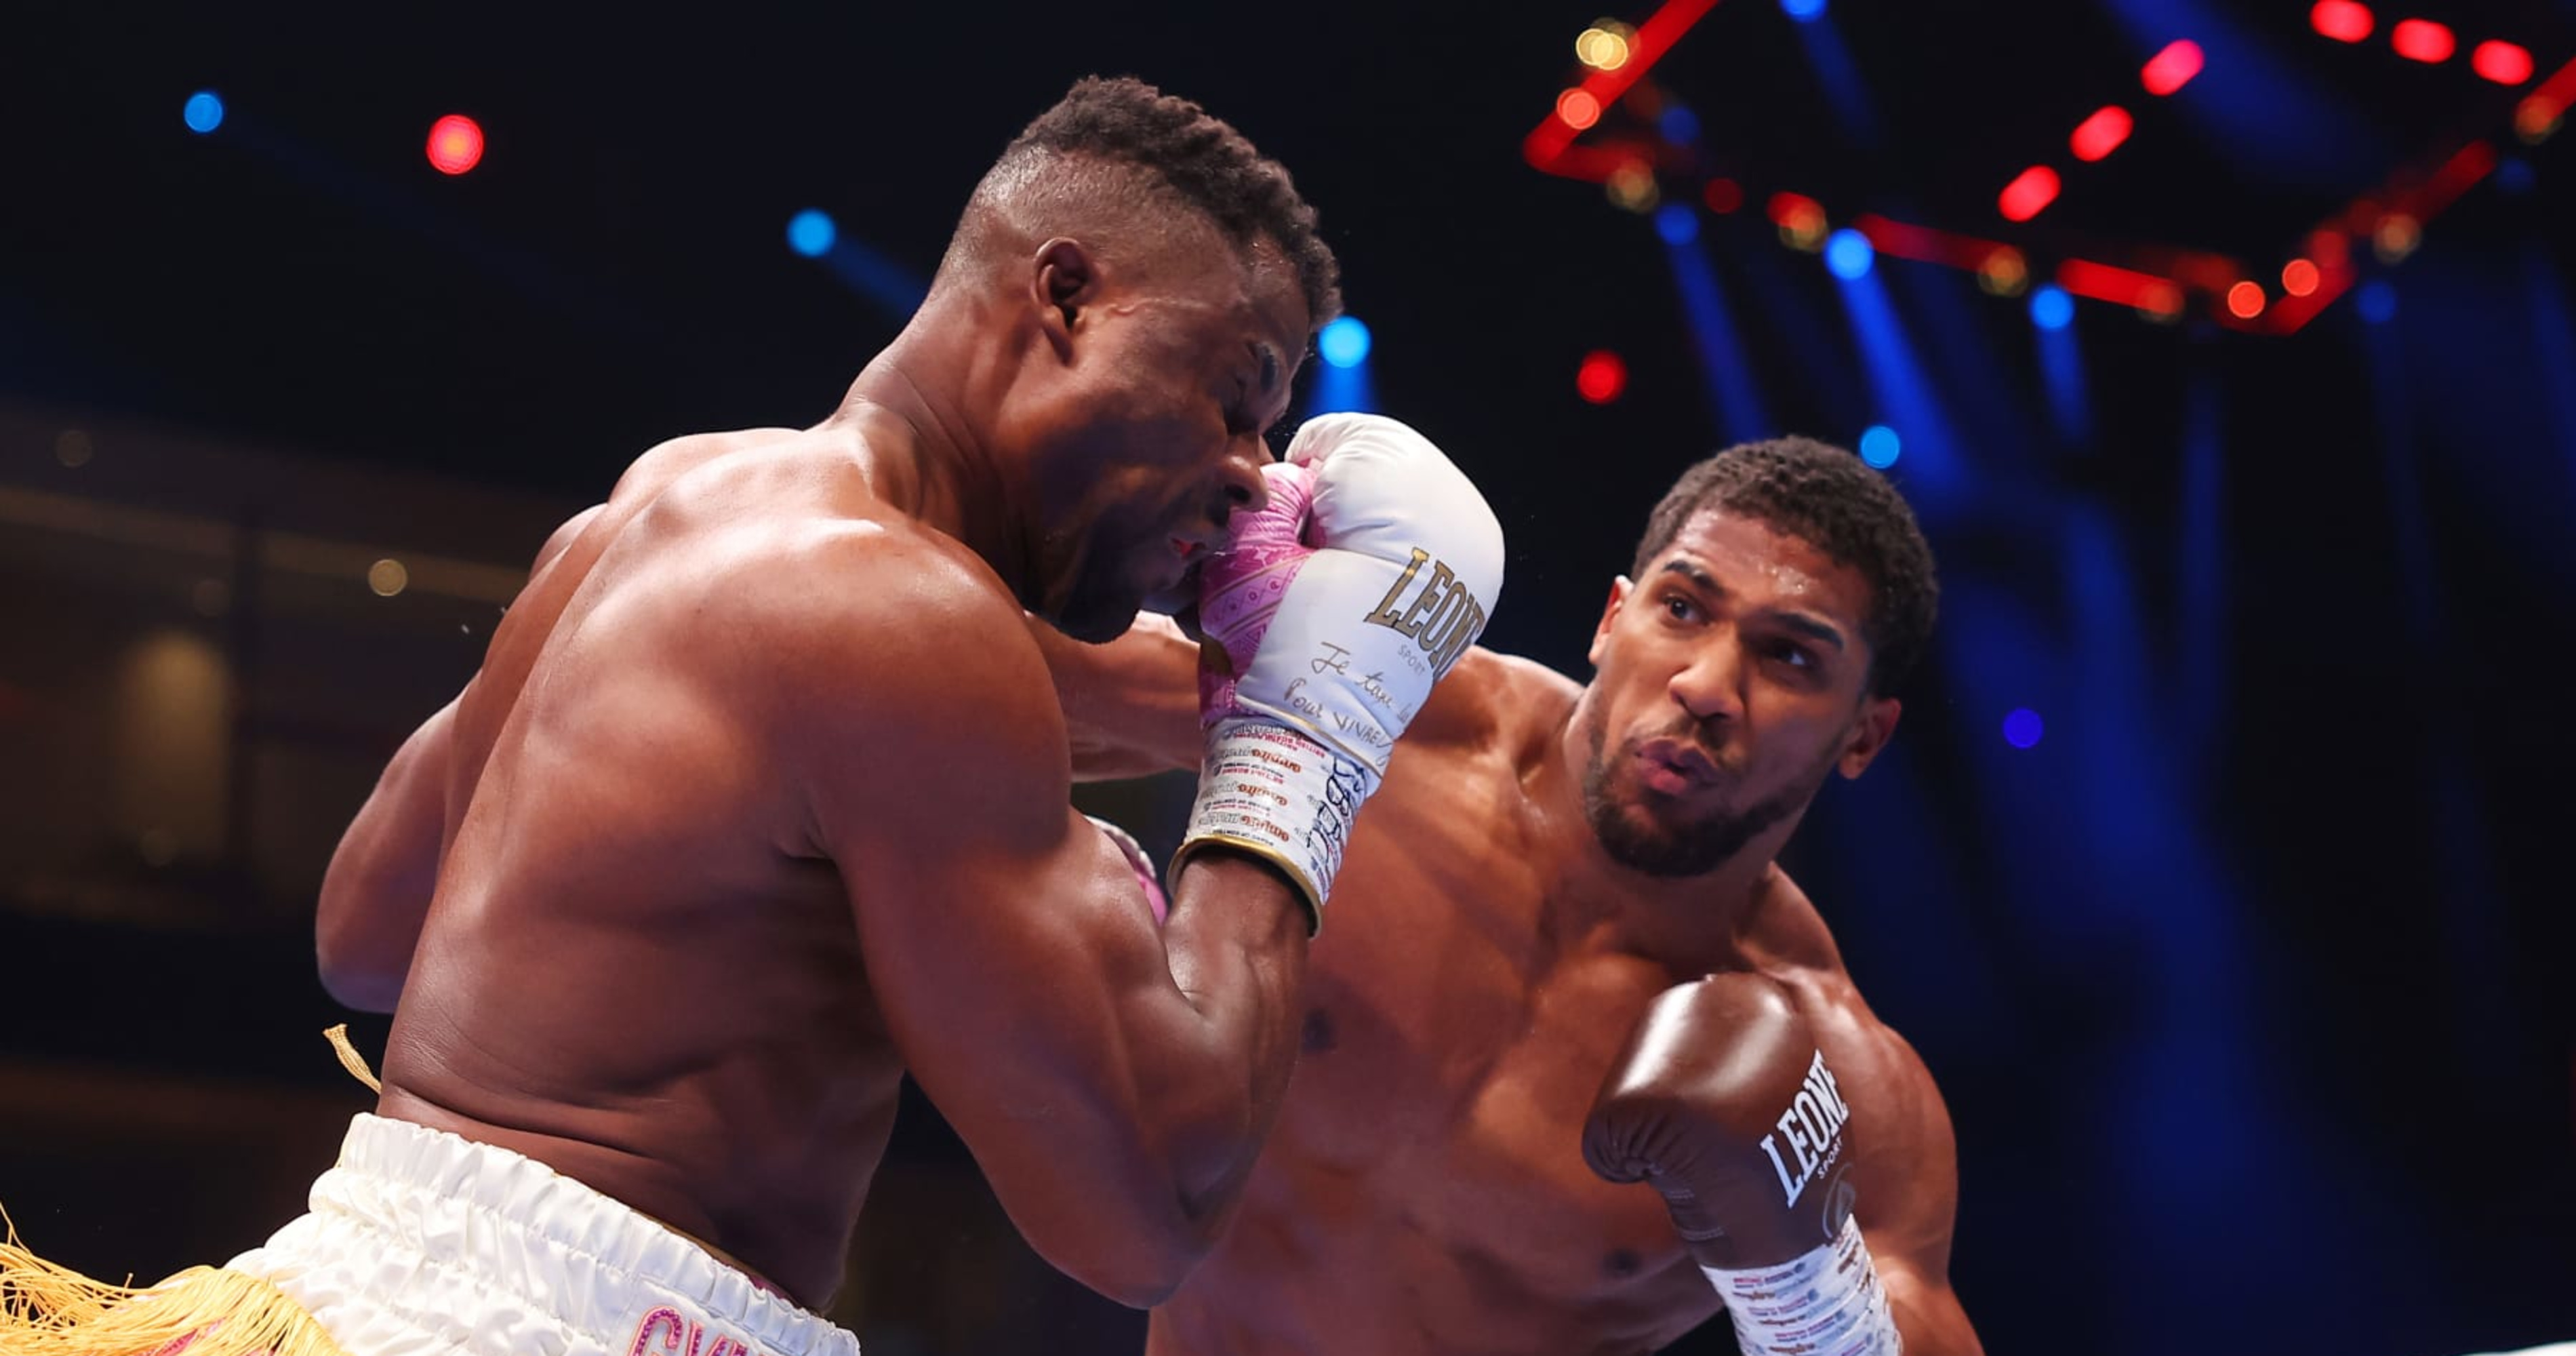 Anthony Joshua's Brutal KO Win Over Francis Ngannou Shows There Are Levels to This